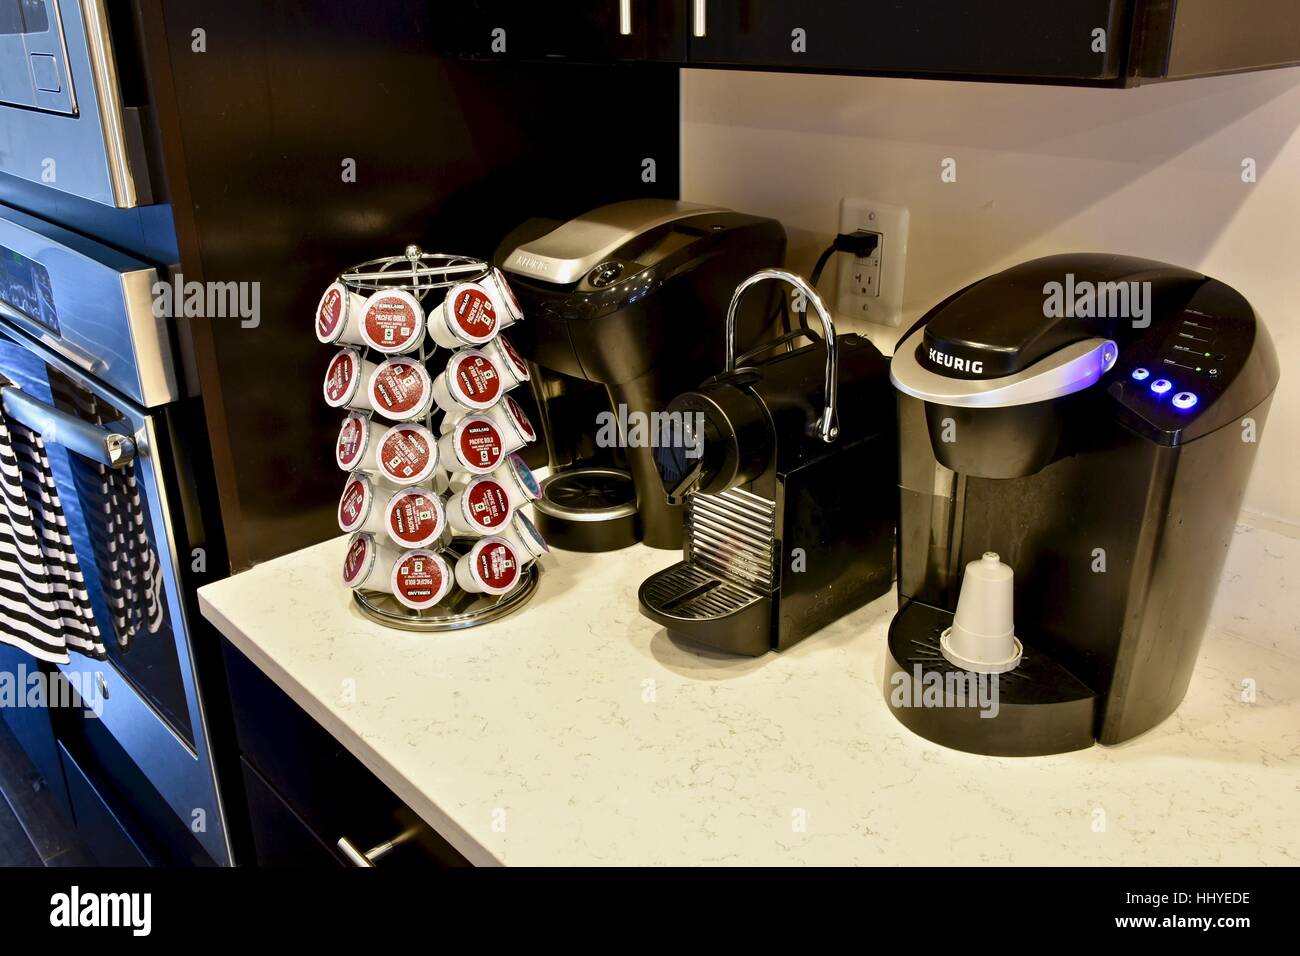 https://c8.alamy.com/comp/HHYEDE/a-modern-kitchen-with-two-keurig-coffee-machines-and-a-nespresso-machine-HHYEDE.jpg